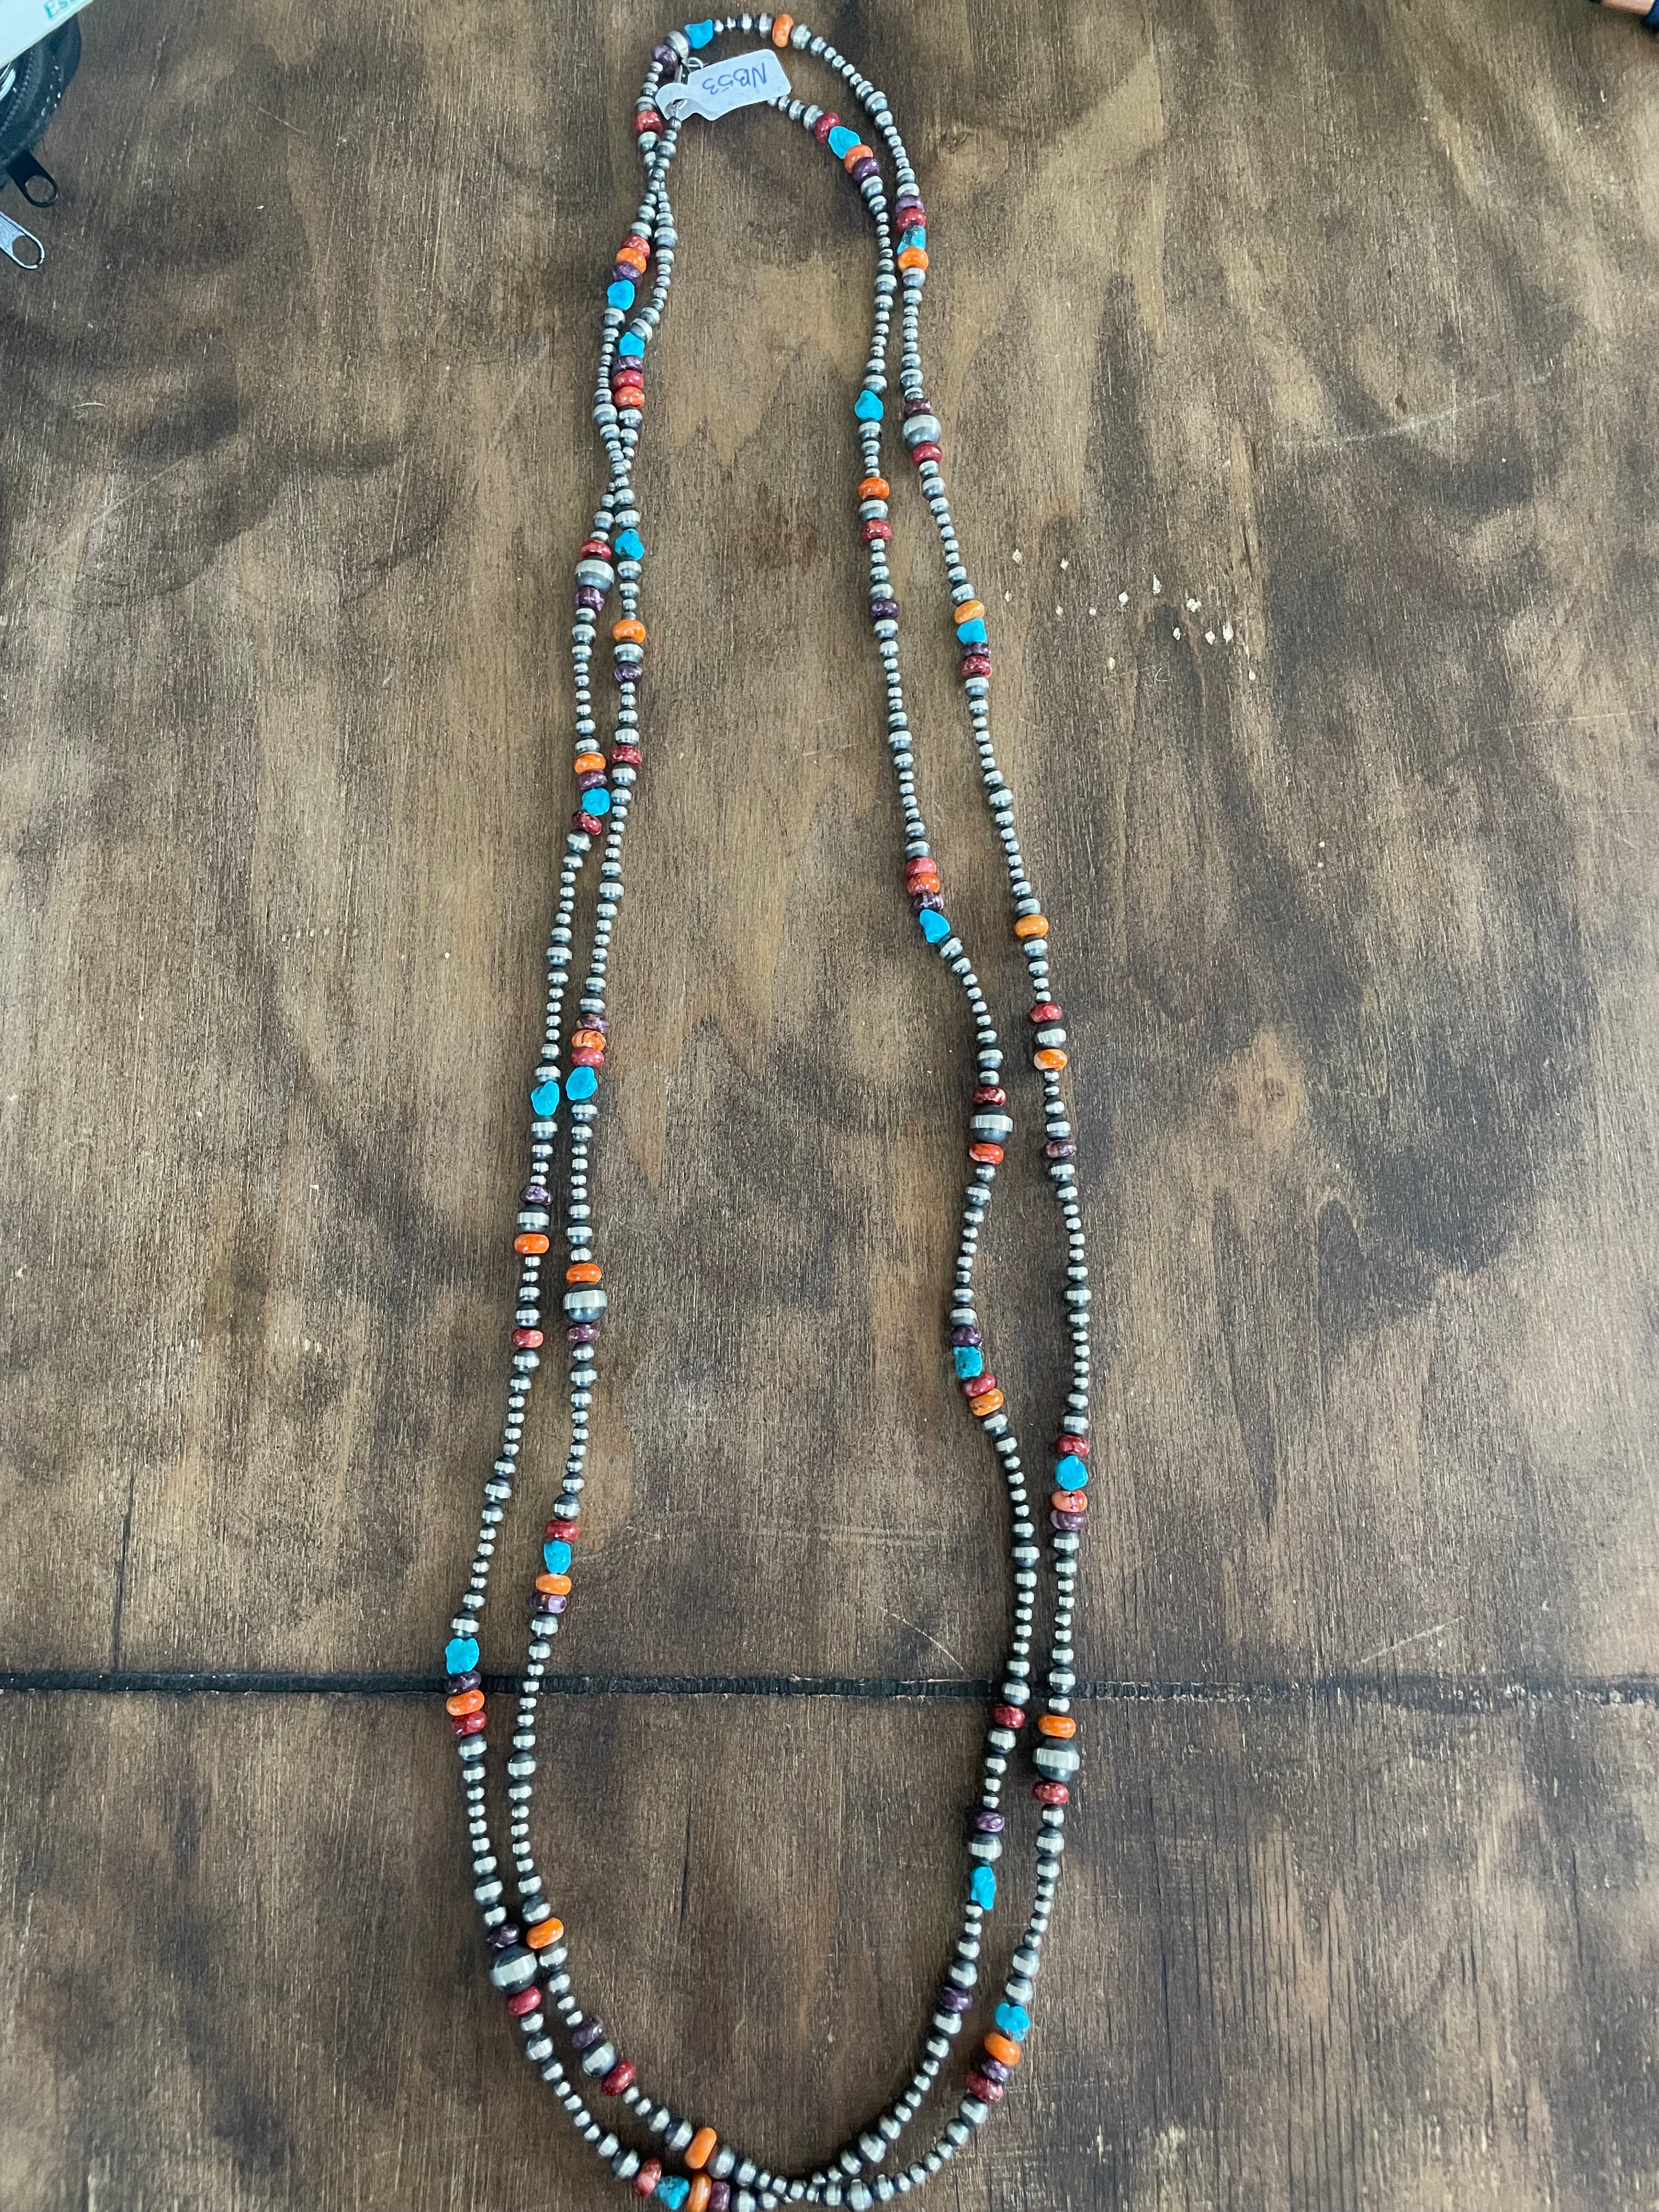 Variated Navajos Necklace Colorful 72in